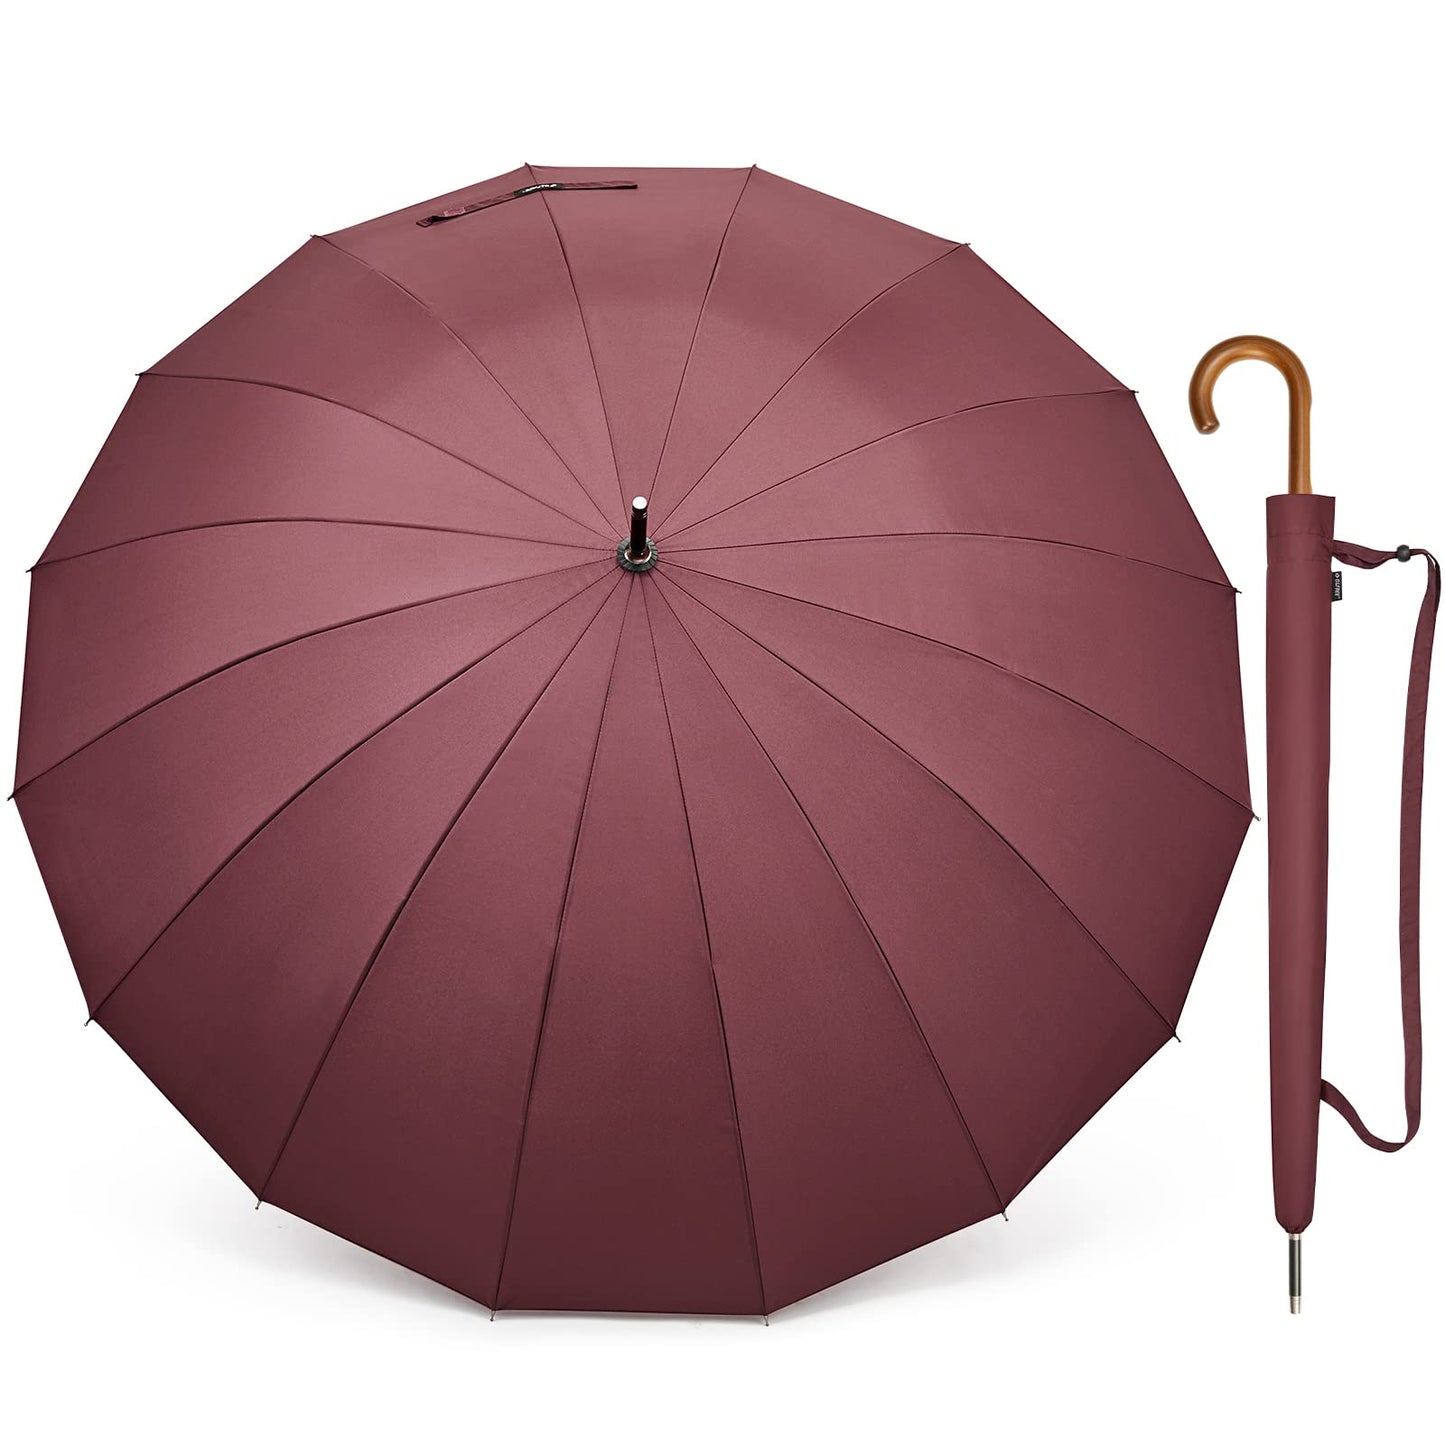 G4Free 54 Inch 16 Ribs Large Windproof Umbrella for 2 Persons